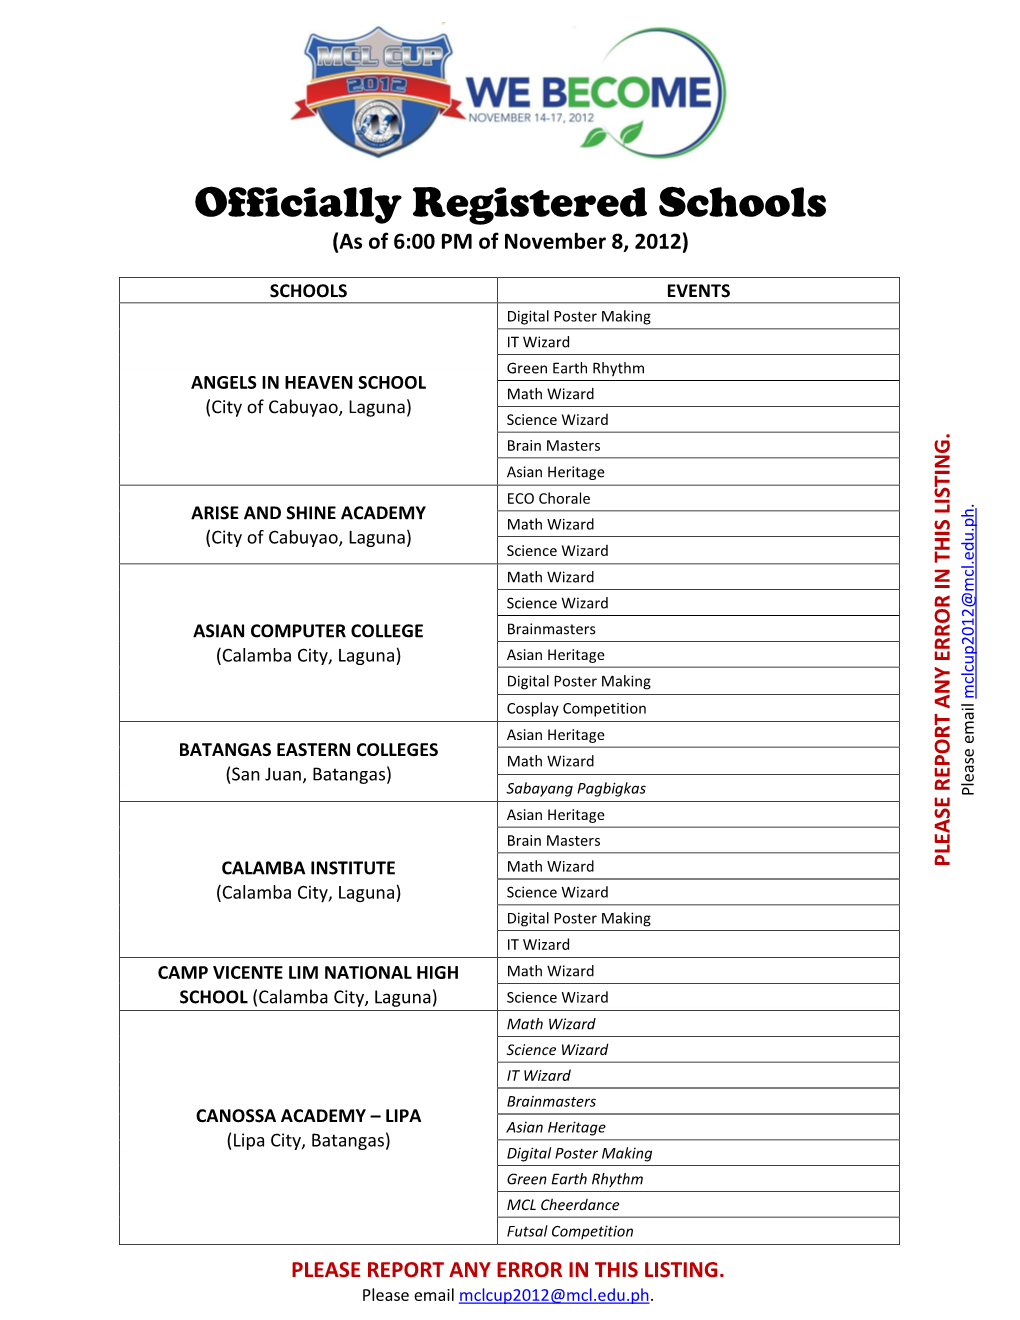 Officially Registered Schools (As of 6:00 PM of November 8, 2012)